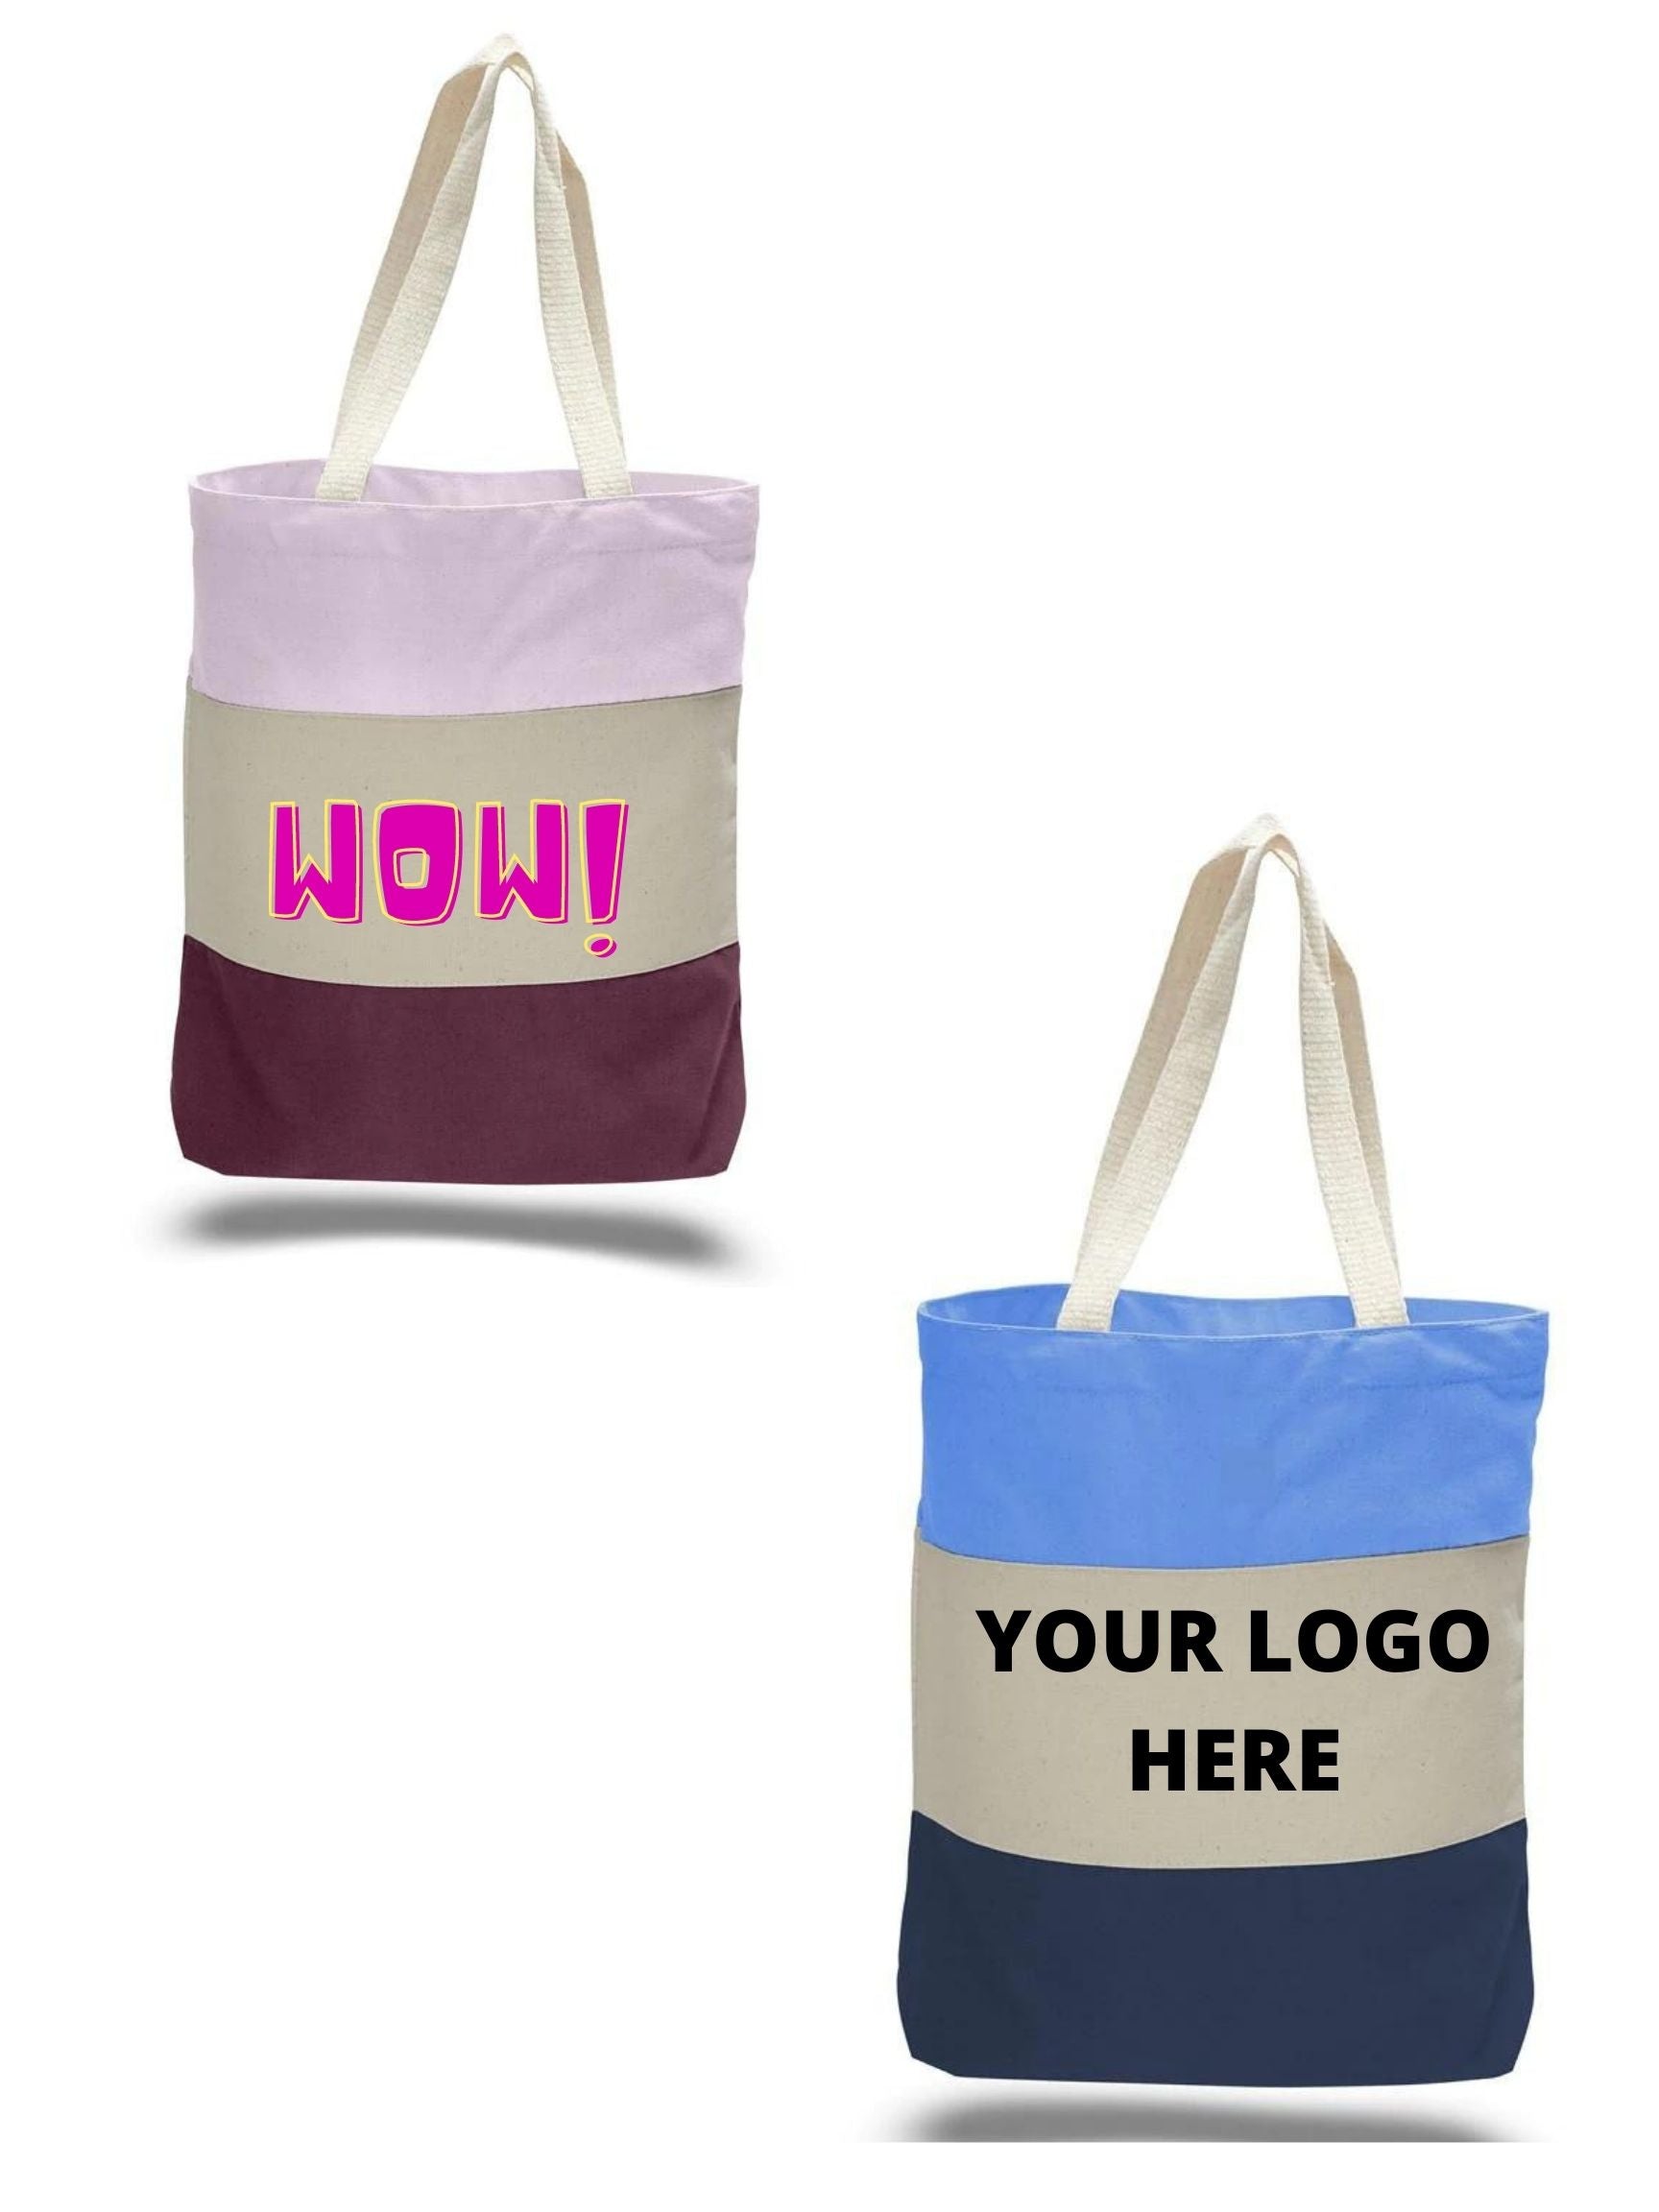 Custom Bags - Shop Promotional Bags Today